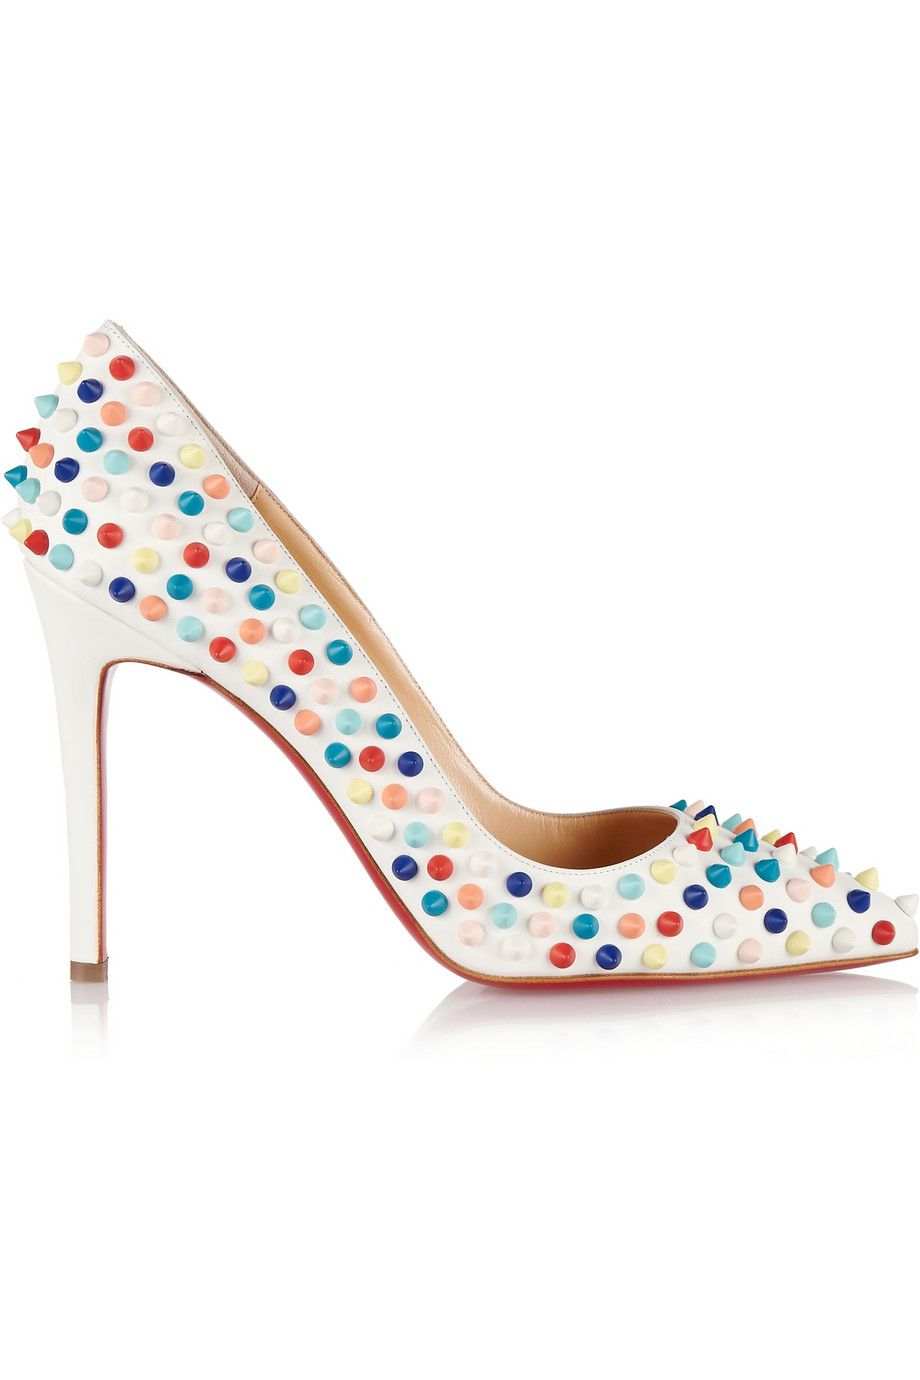 Christian Louboutin Pigalle Spikes 100 Leather Pumps in White | Lyst